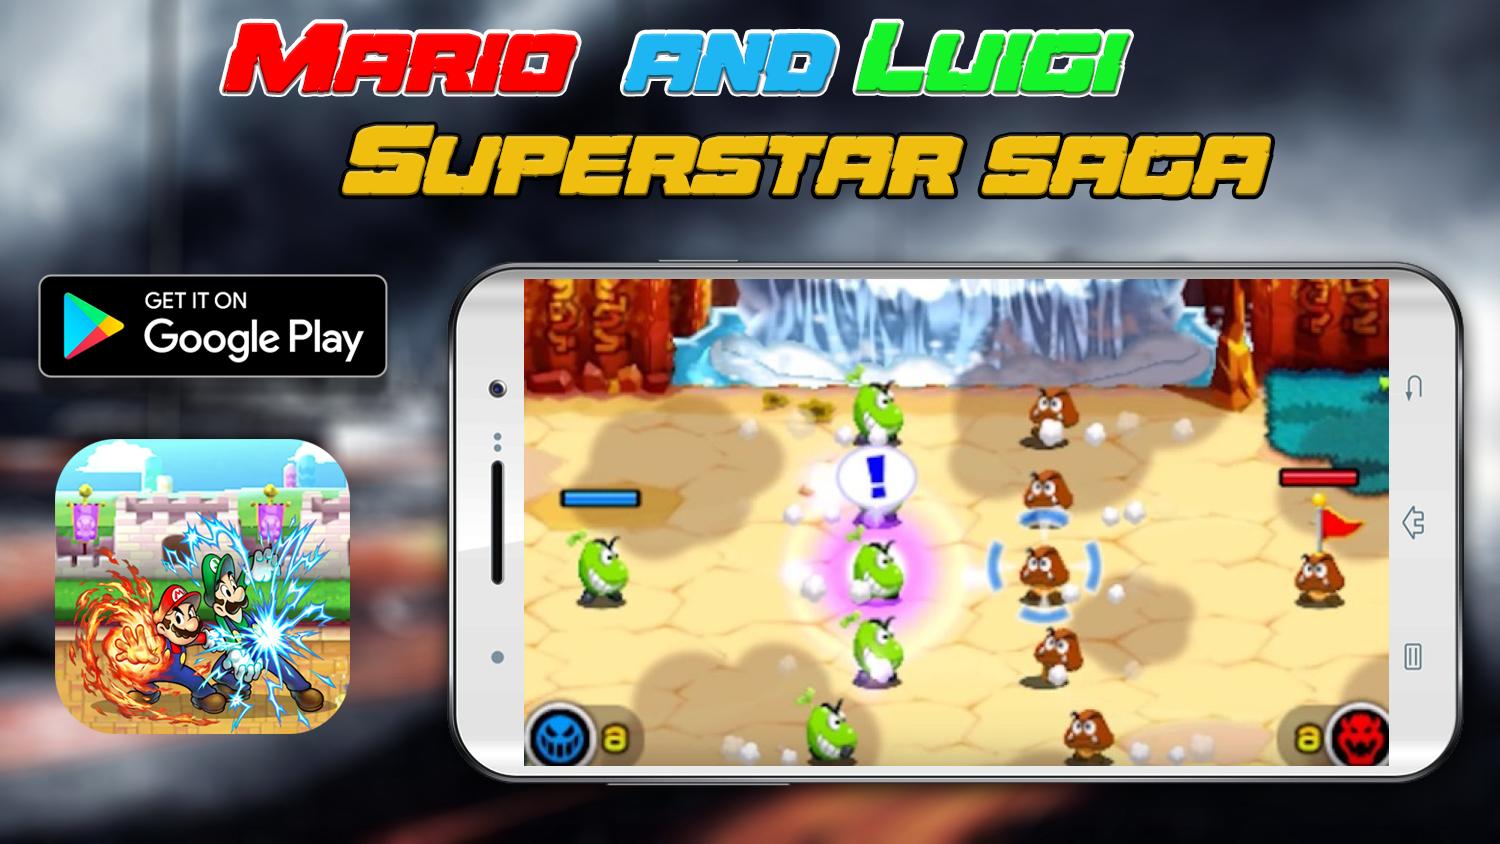 Guide for Mario and Luigi superstar saga for Android - APK Download